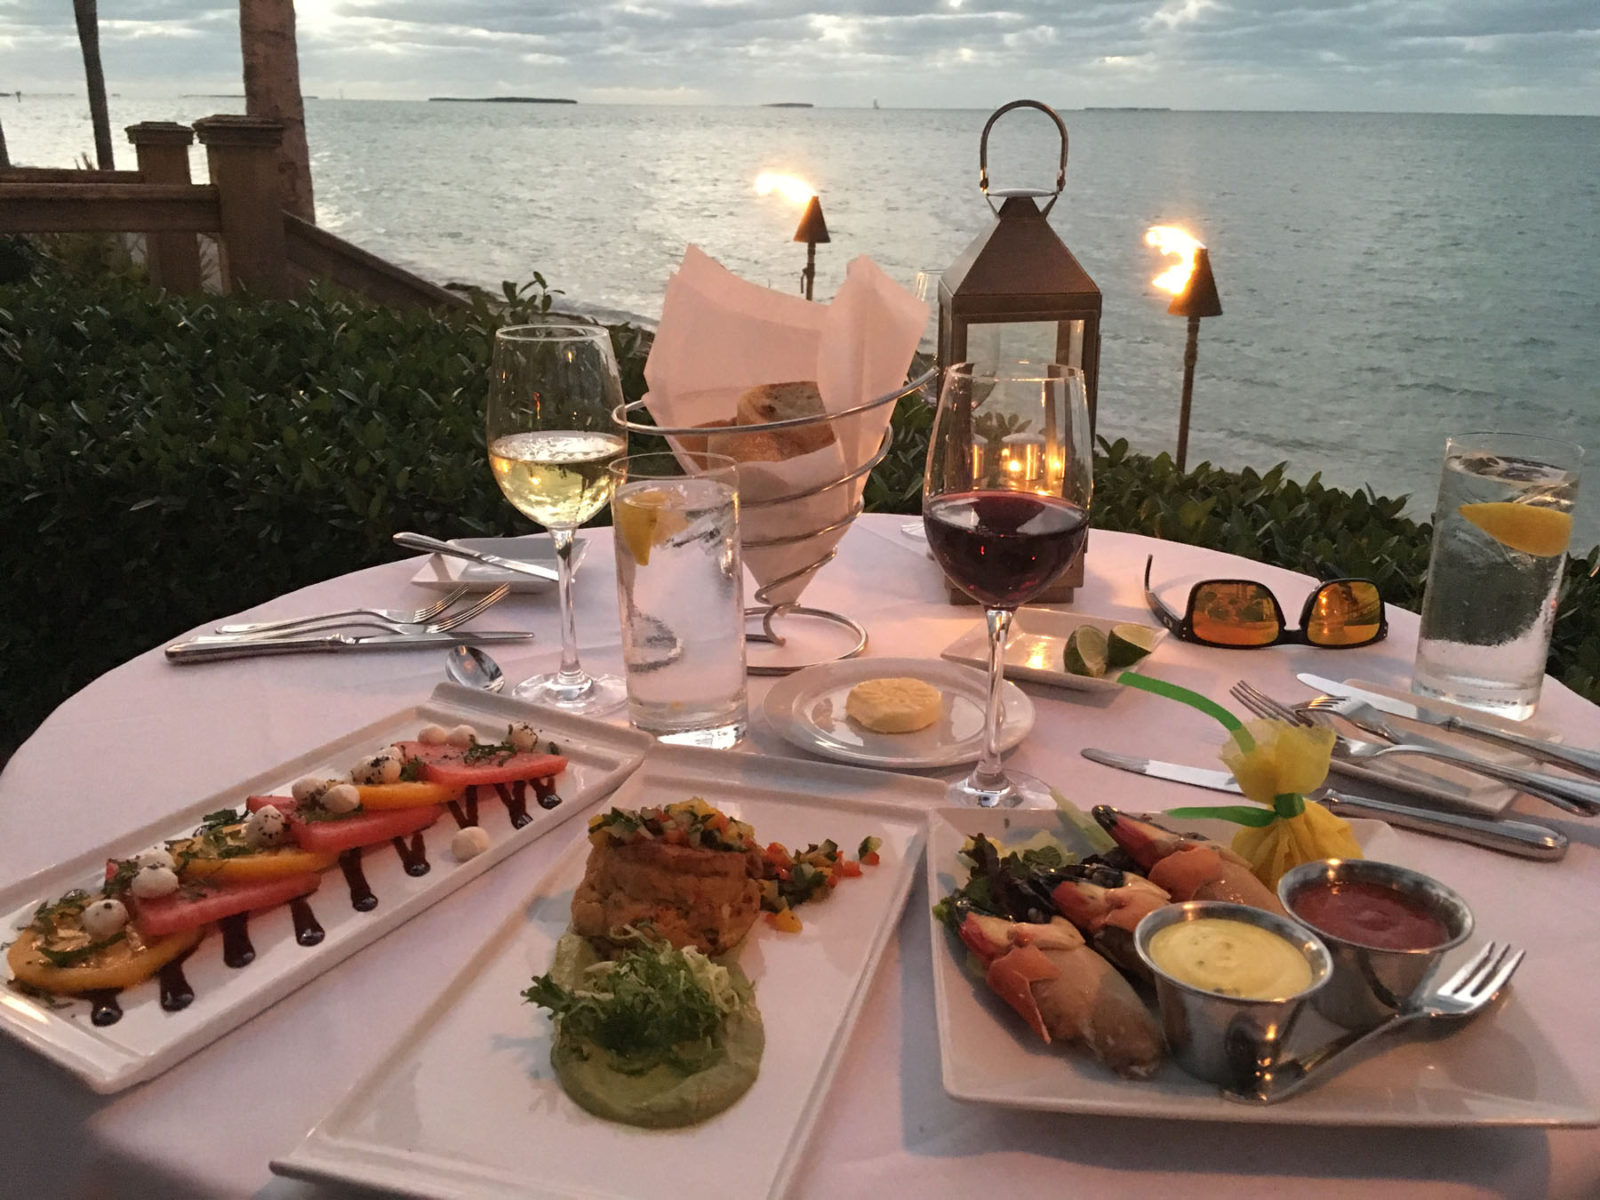 Key West Best Dining, Bars, Restaurants, Hotel review